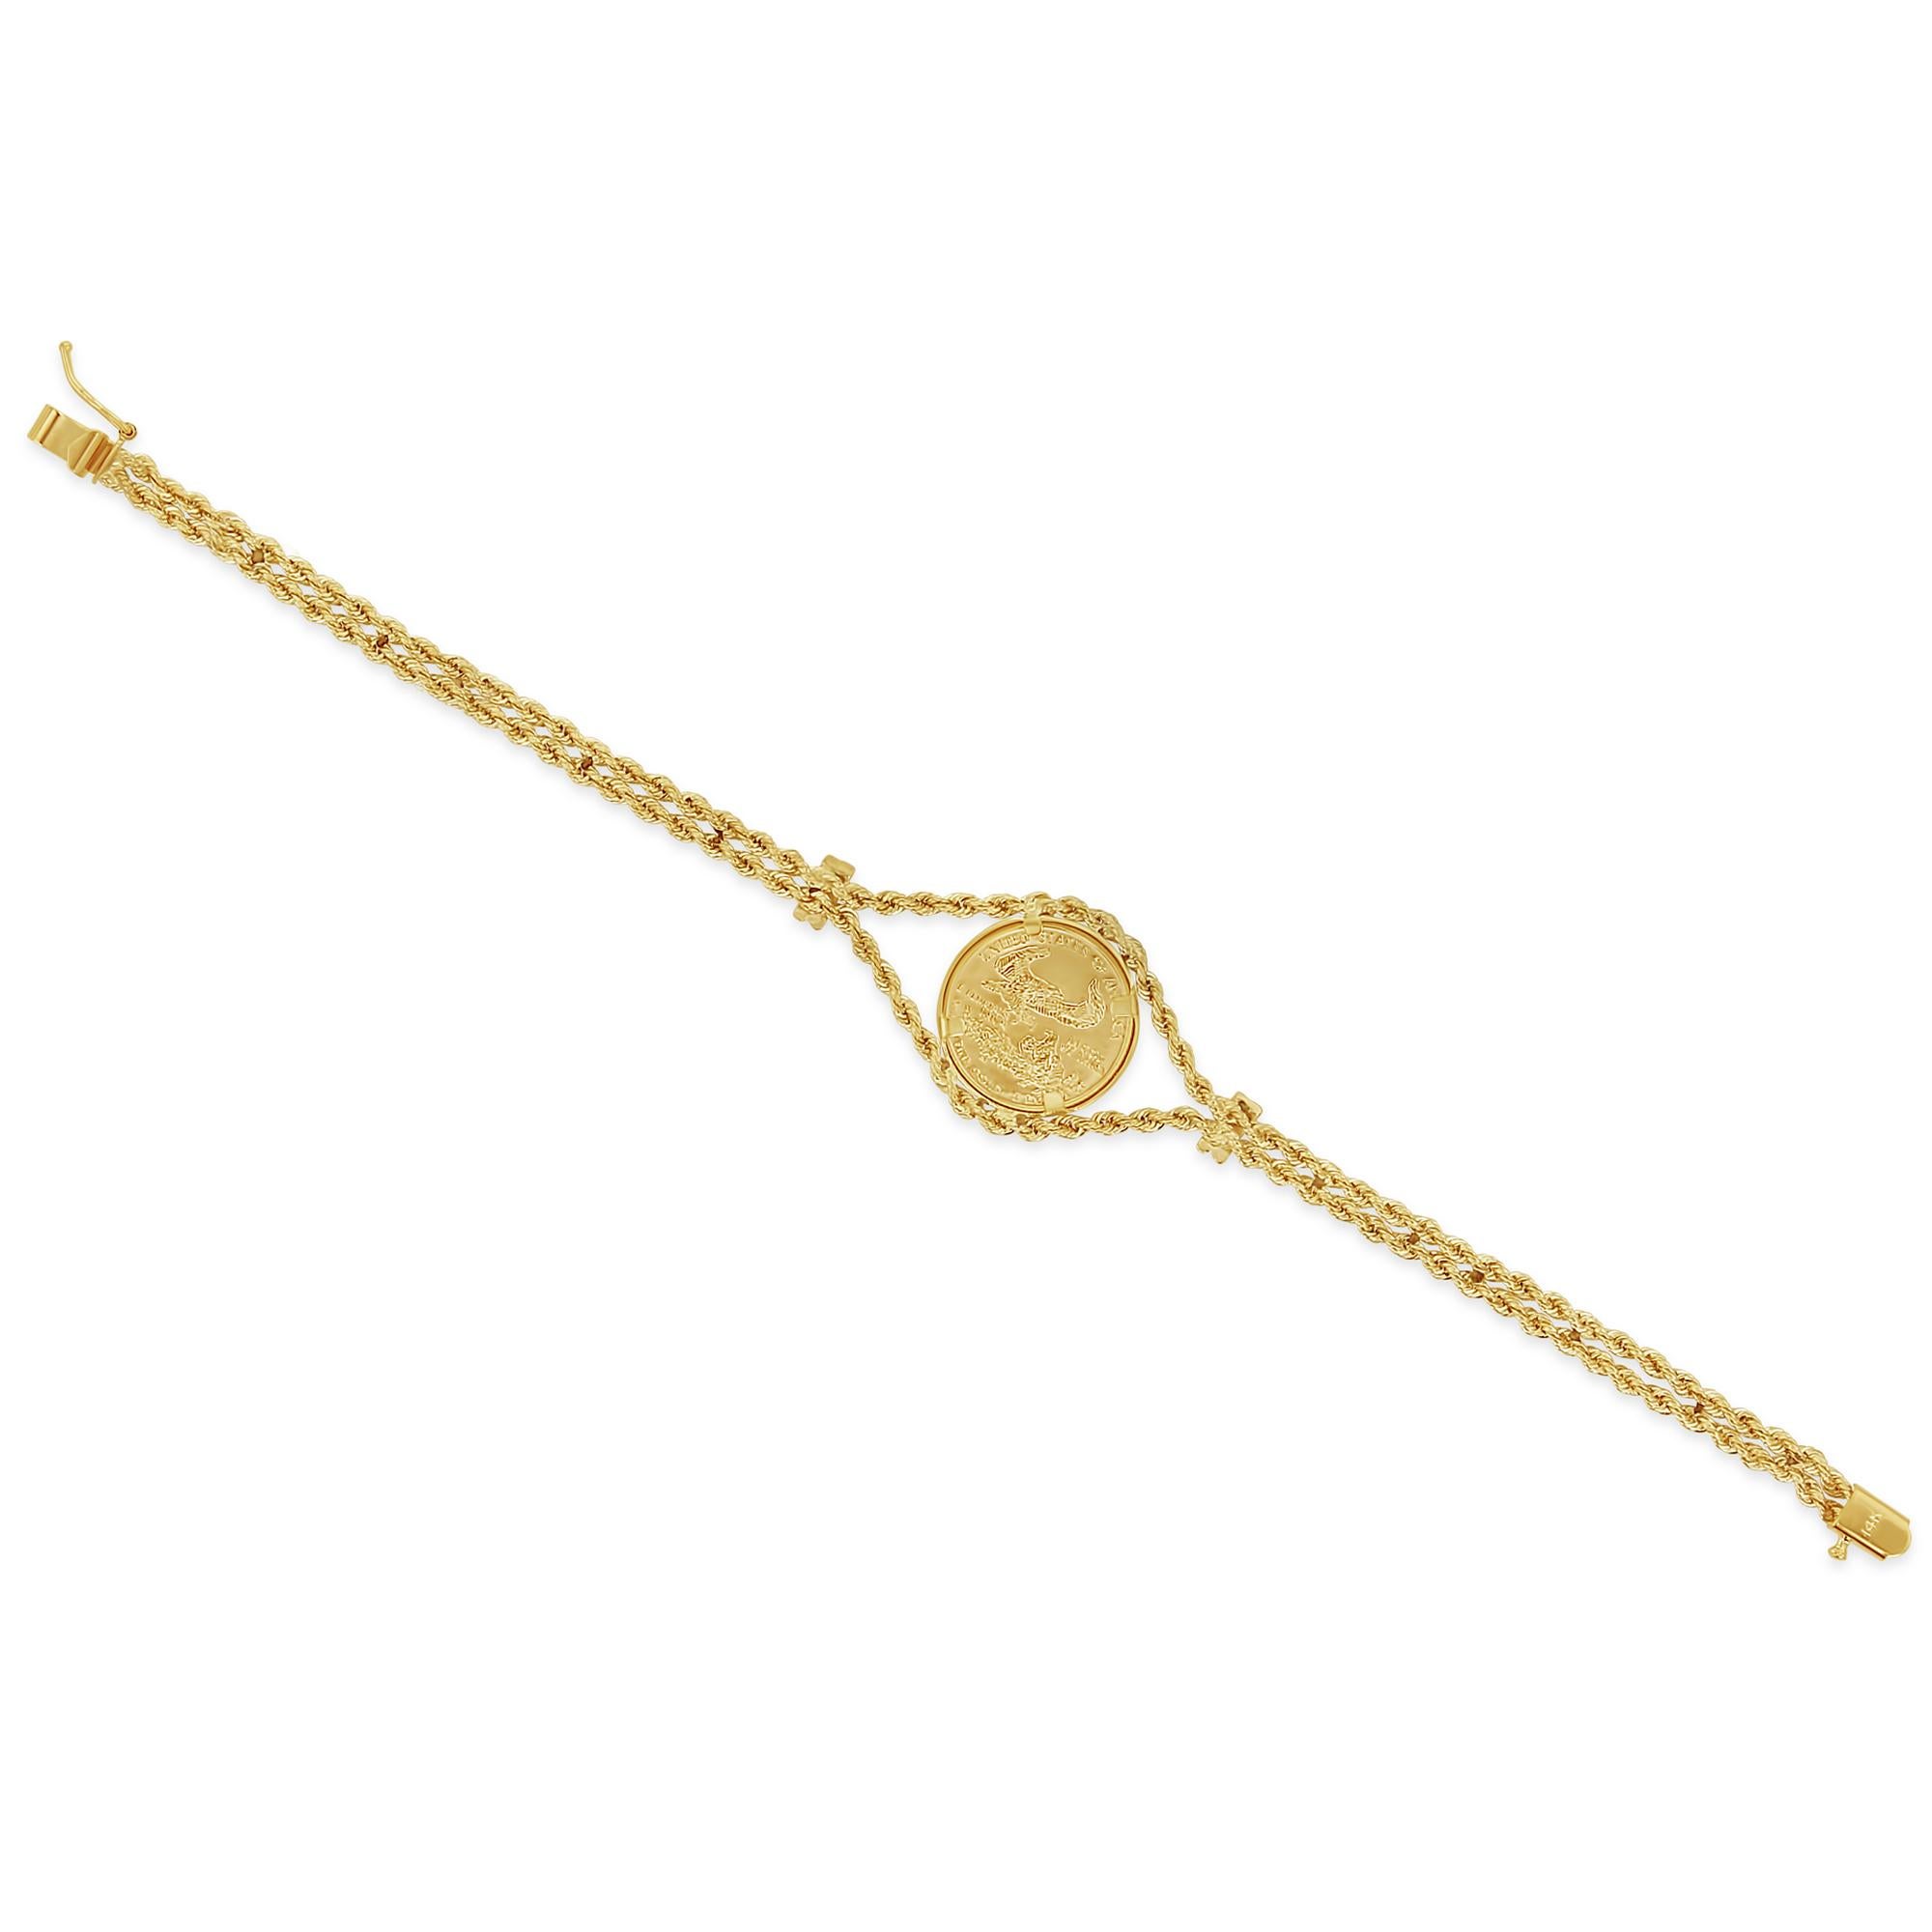 1992 Lady Liberty US Coin Bracelet with Polished Bezel on Rope Chain 14k Yellow Gold

Step into a piece of history with our exquisite 1992 Lady Liberty US Coin Bracelet, elegantly encased in a polished bezel and set on a delicate rope chain in 14k